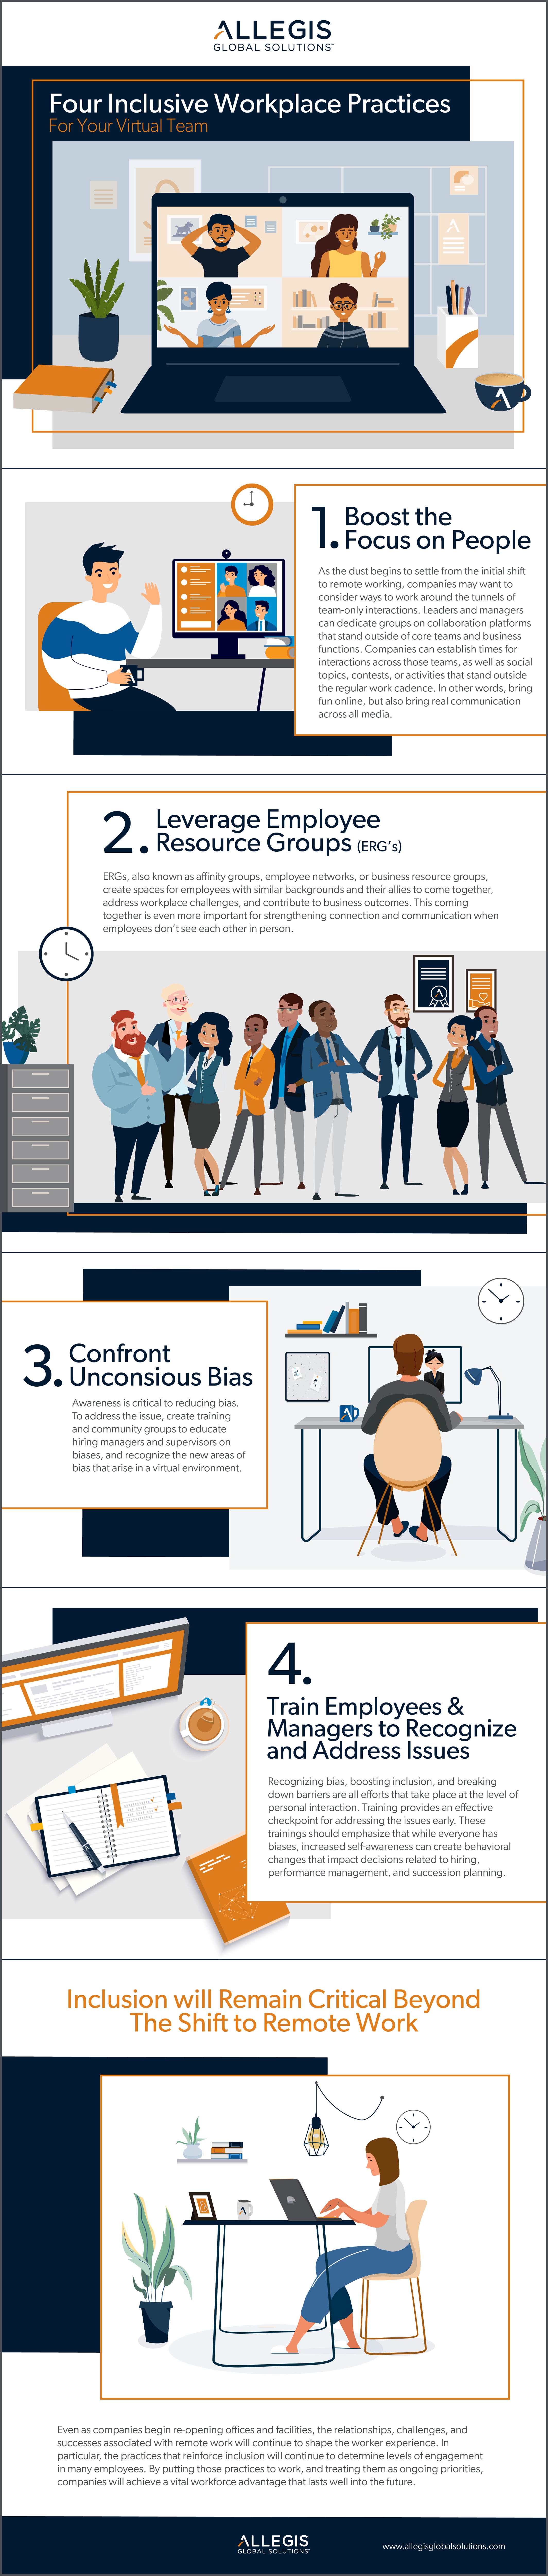 Four inclusive workplace practices infographic